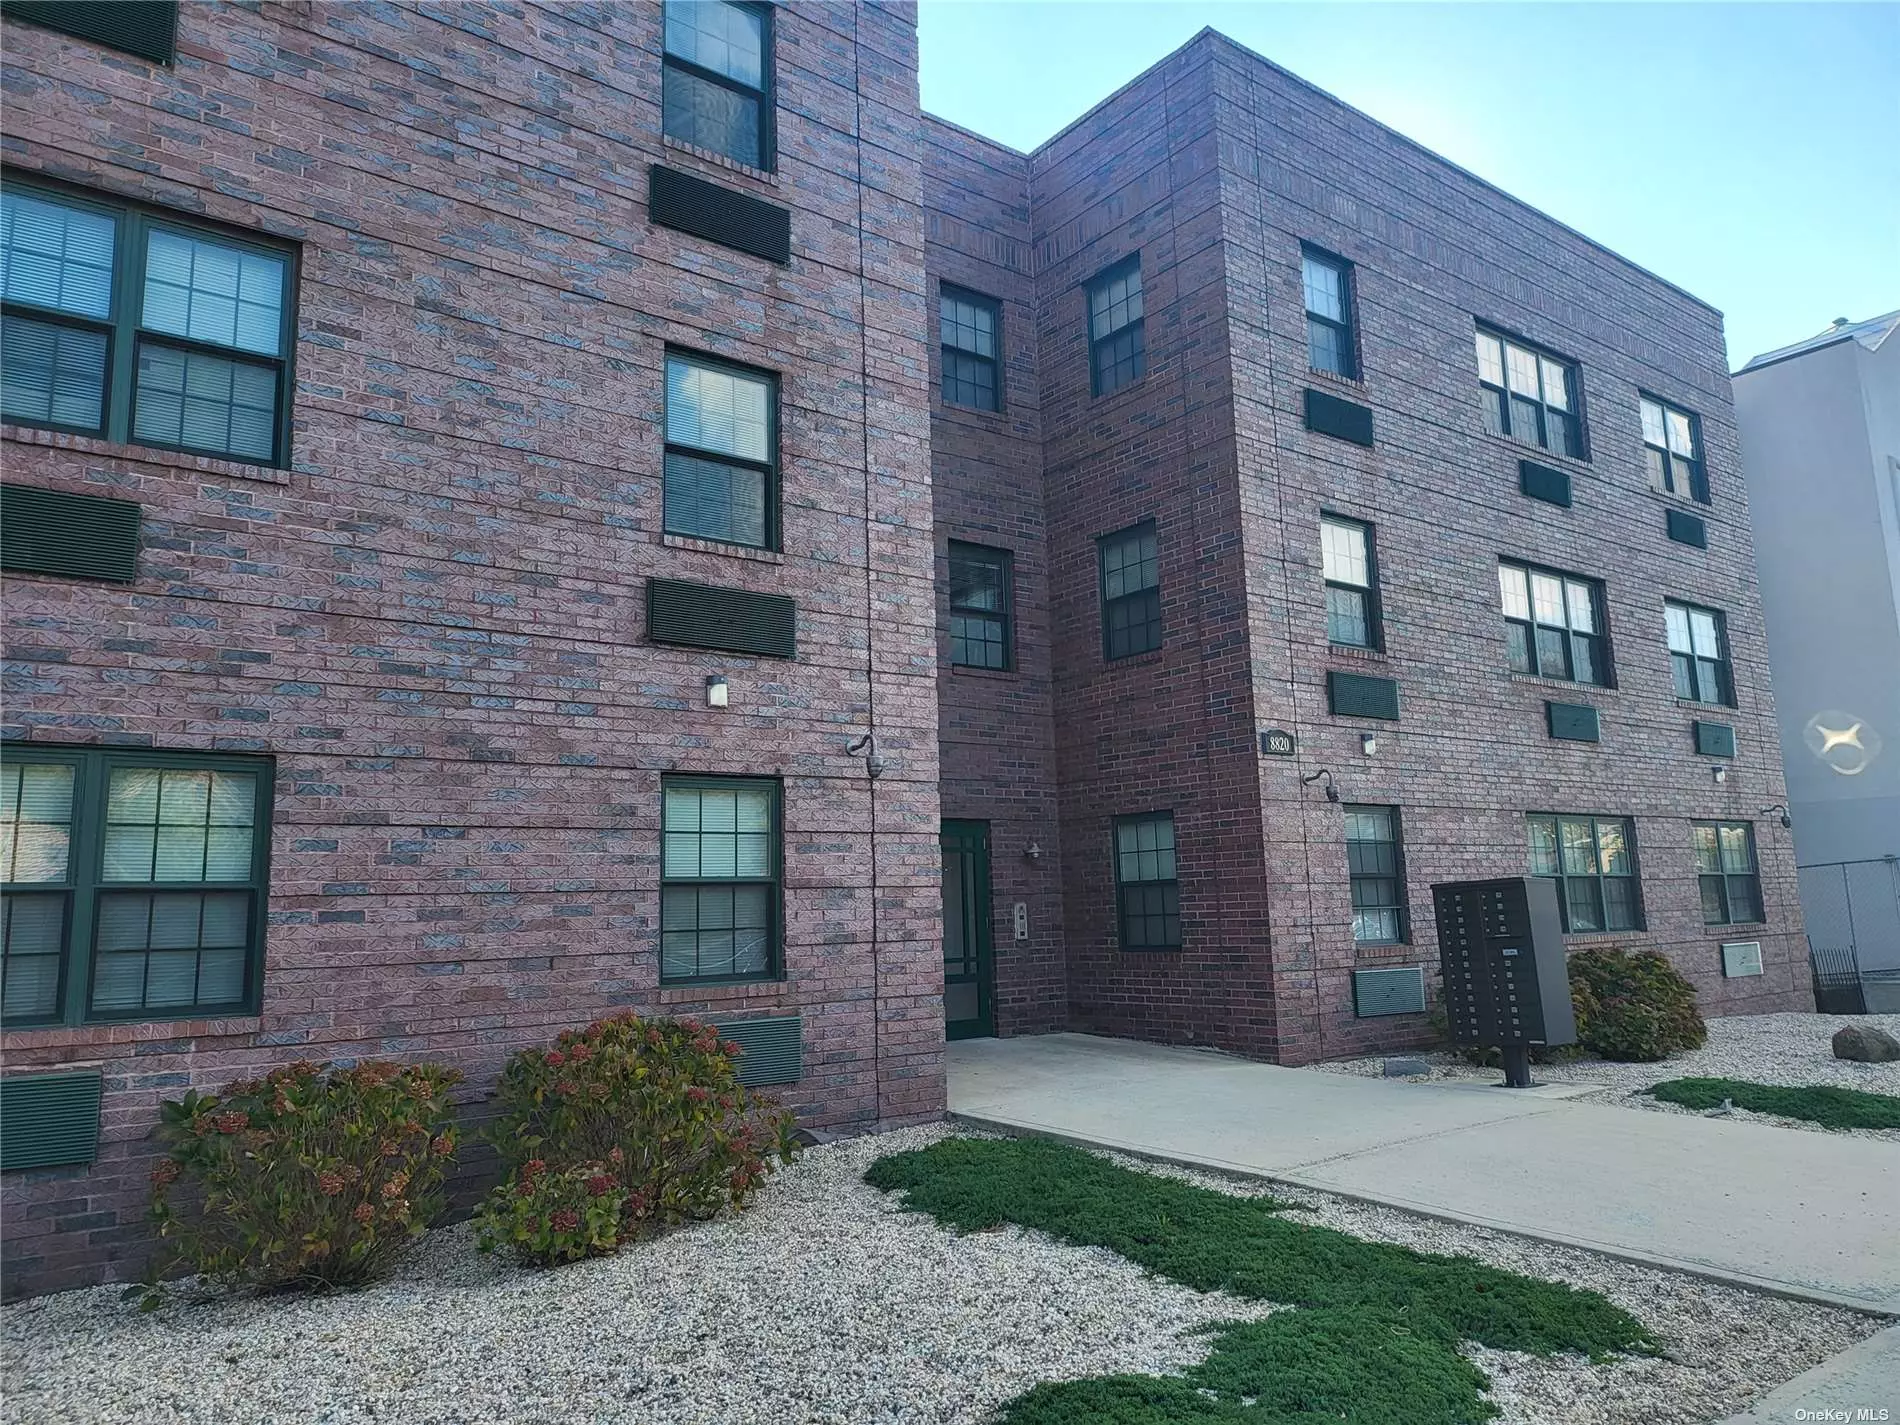 24 unit building, 2 bed/2 bath each unit. Tenants pay for all utilities except water. No gas in building. Legal super unit. Additional room in basement with half bath use as accessory office. No boiler, no compactor room, no elevator with additional storage rooms.